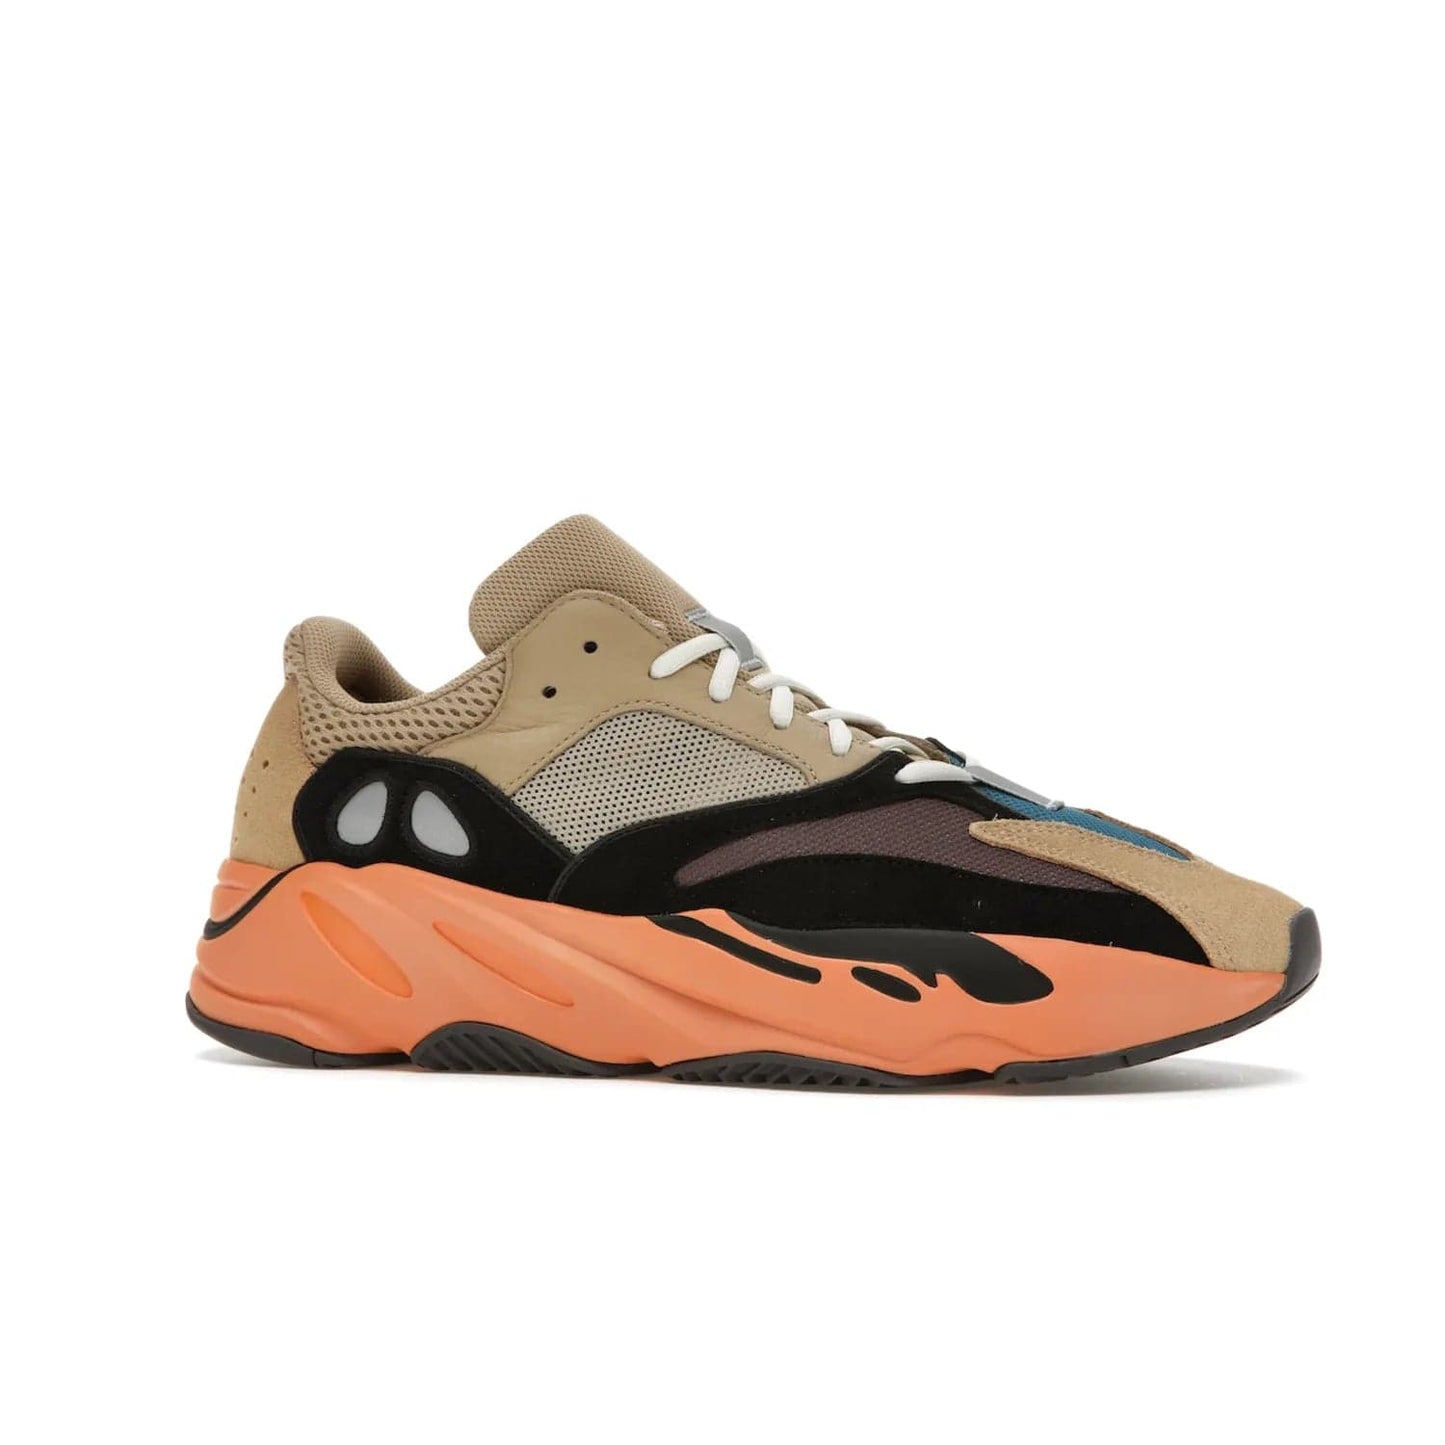 adidas Yeezy Boost 700 Enflame Amber - Image 3 - Only at www.BallersClubKickz.com - Adidas Yeezy Boost 700 Enflame Amber: Eye-catching design with pale yellow, brown, teal, and orange! Get yours in June 2021.